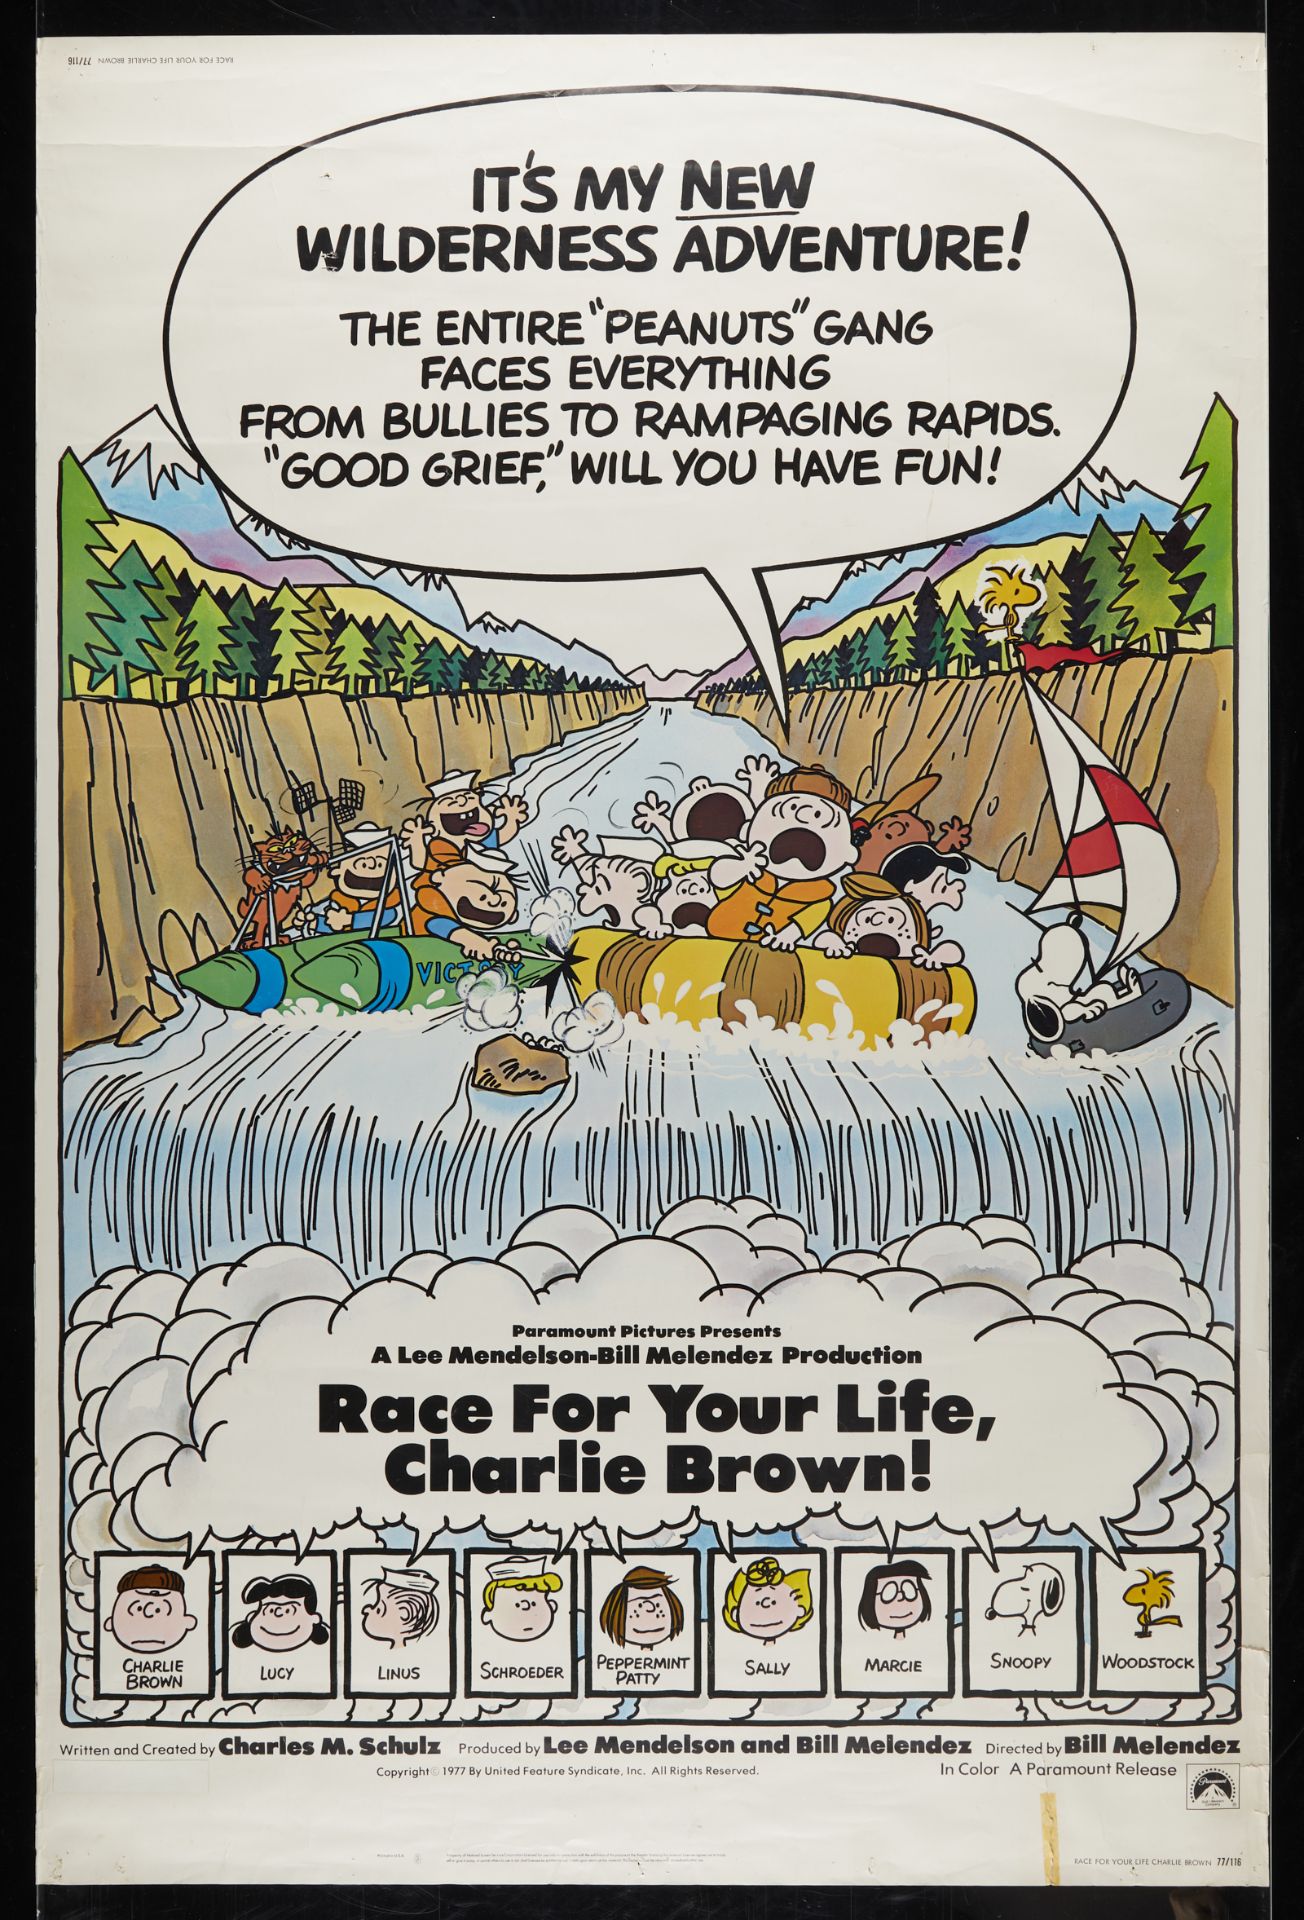 "Race for Your Life, Charlie Brown!" Movie Poster - Bild 2 aus 2